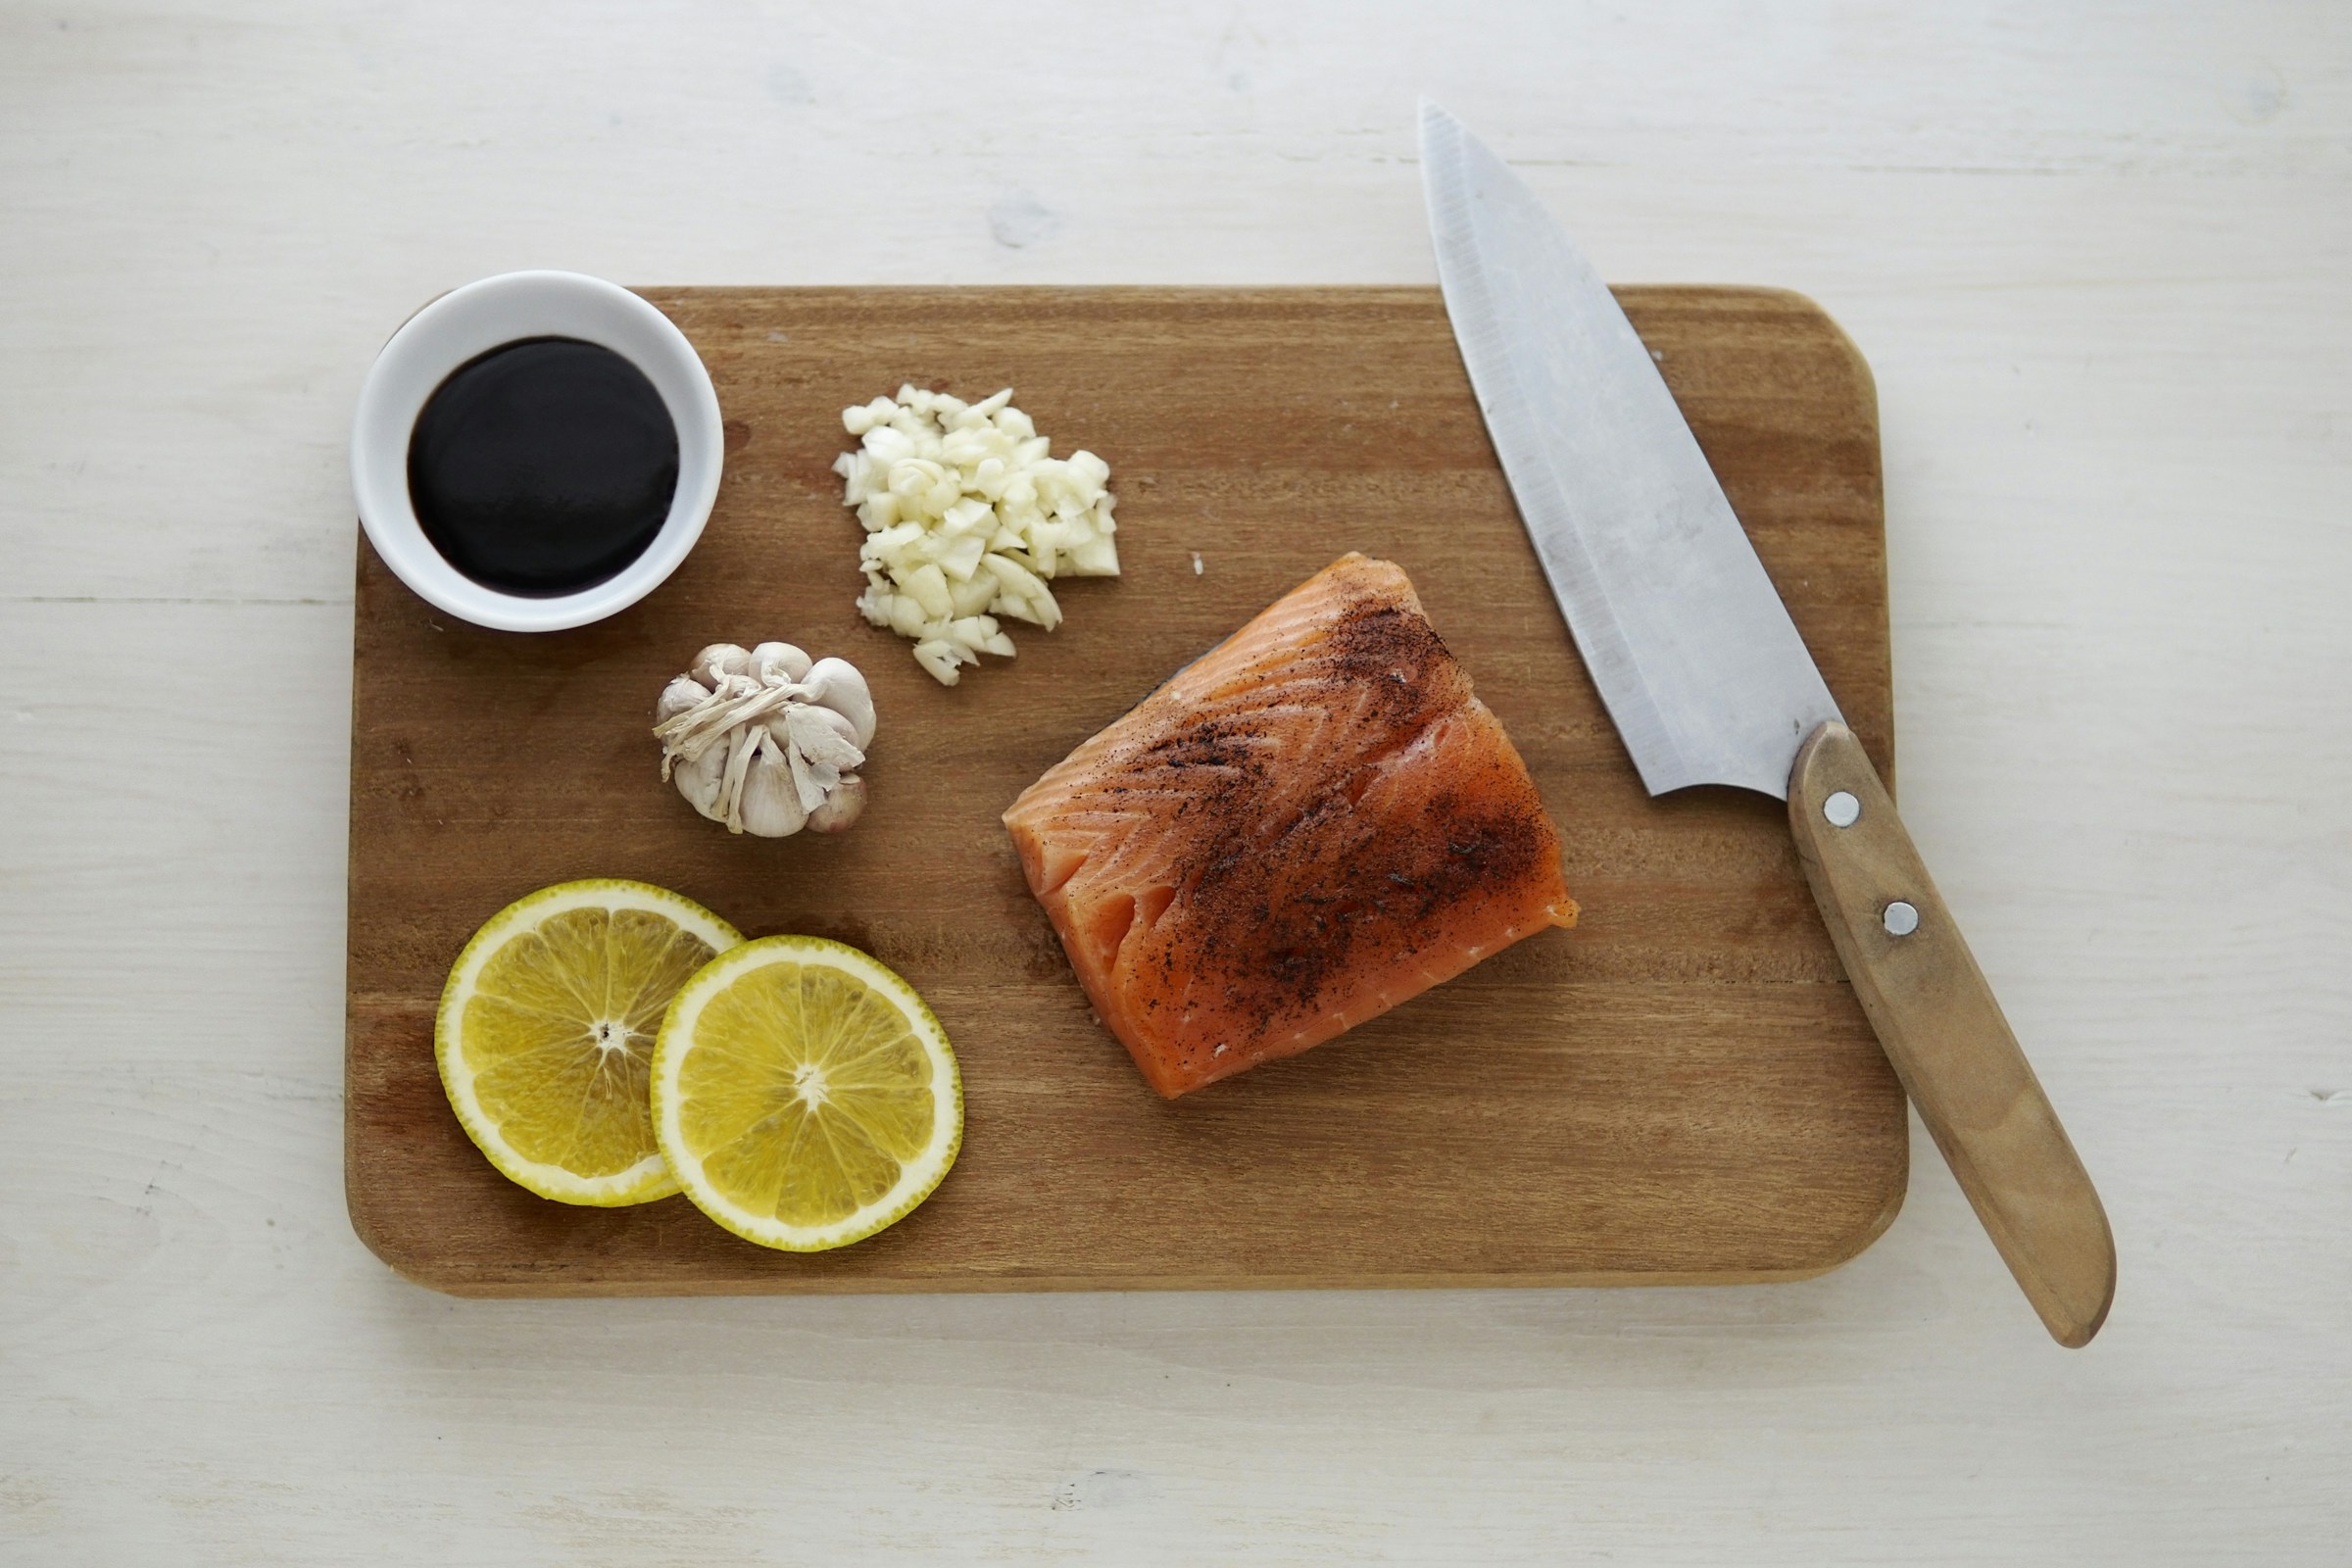 Salmon and lemon and garlic and cheese and knife on a wooden cutting board